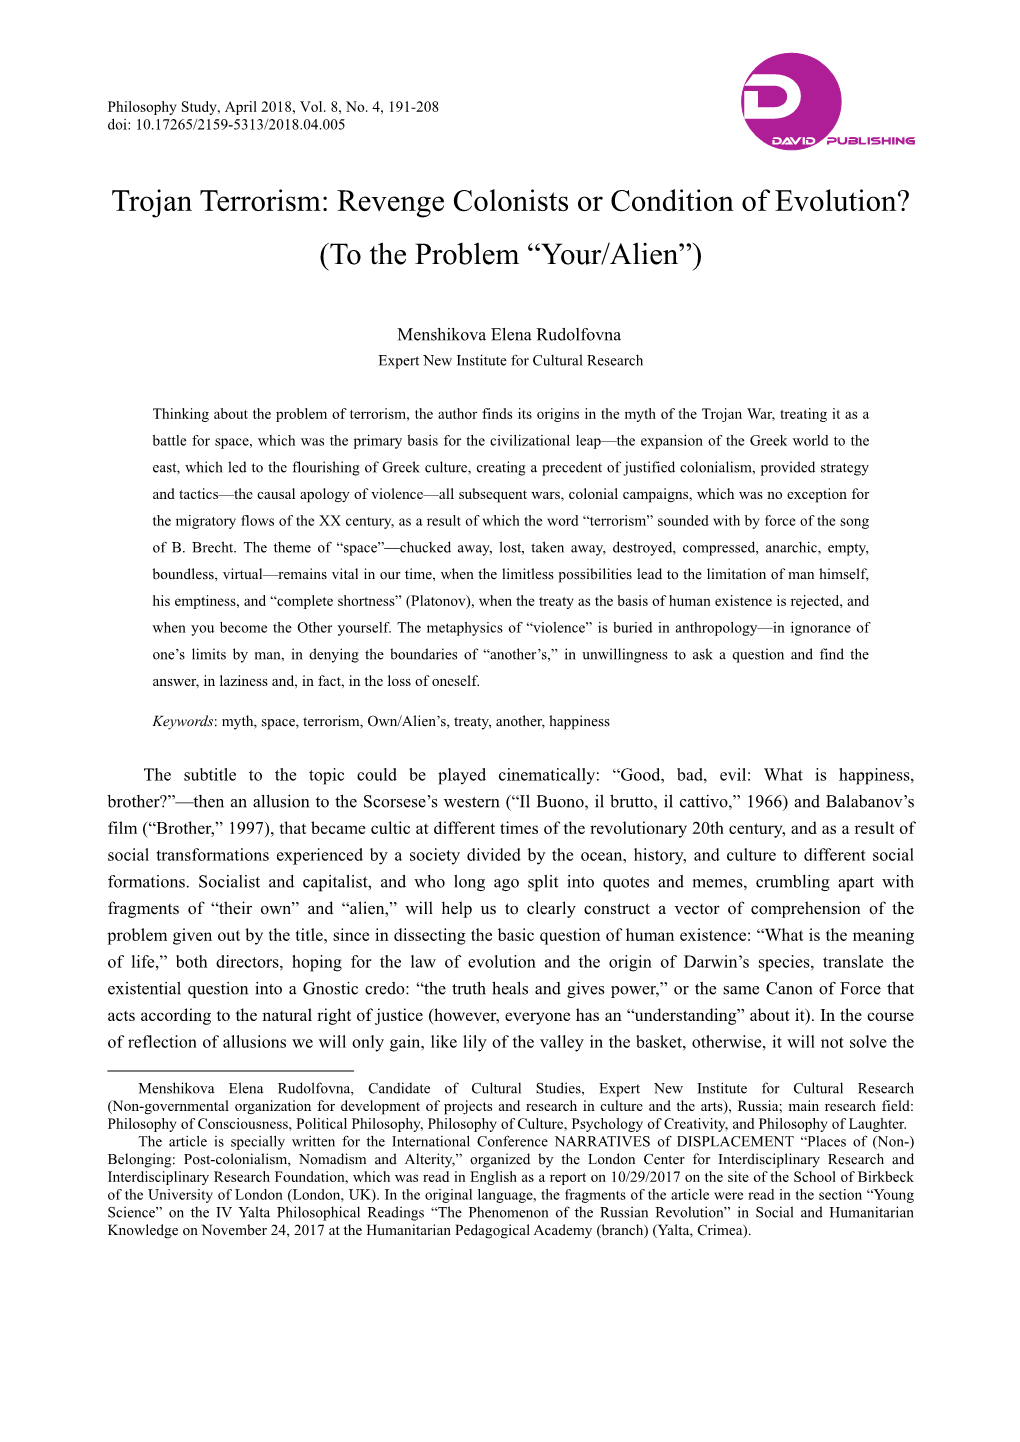 Trojan Terrorism: Revenge Colonists Or Condition of Evolution? (To the Problem “Your/Alien”)